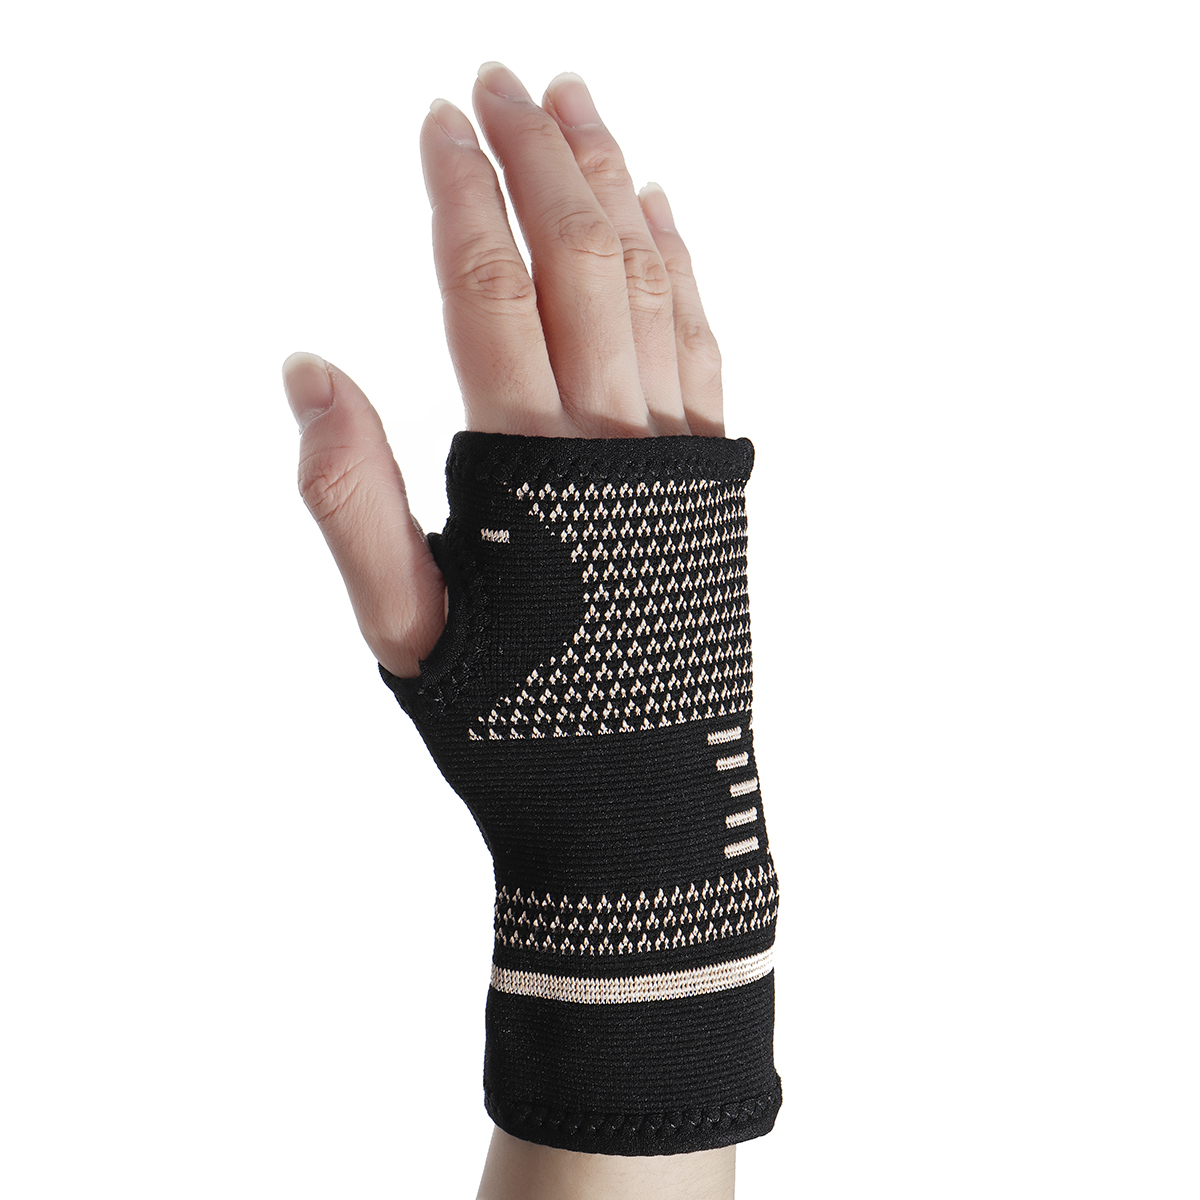 KALOAD-1PC-Copper-Infused-Wrist-Sleeve-Palm-Hand-Support-Outdoor-Sports-Bracer-Support-Fitness-Prote-1429972-3